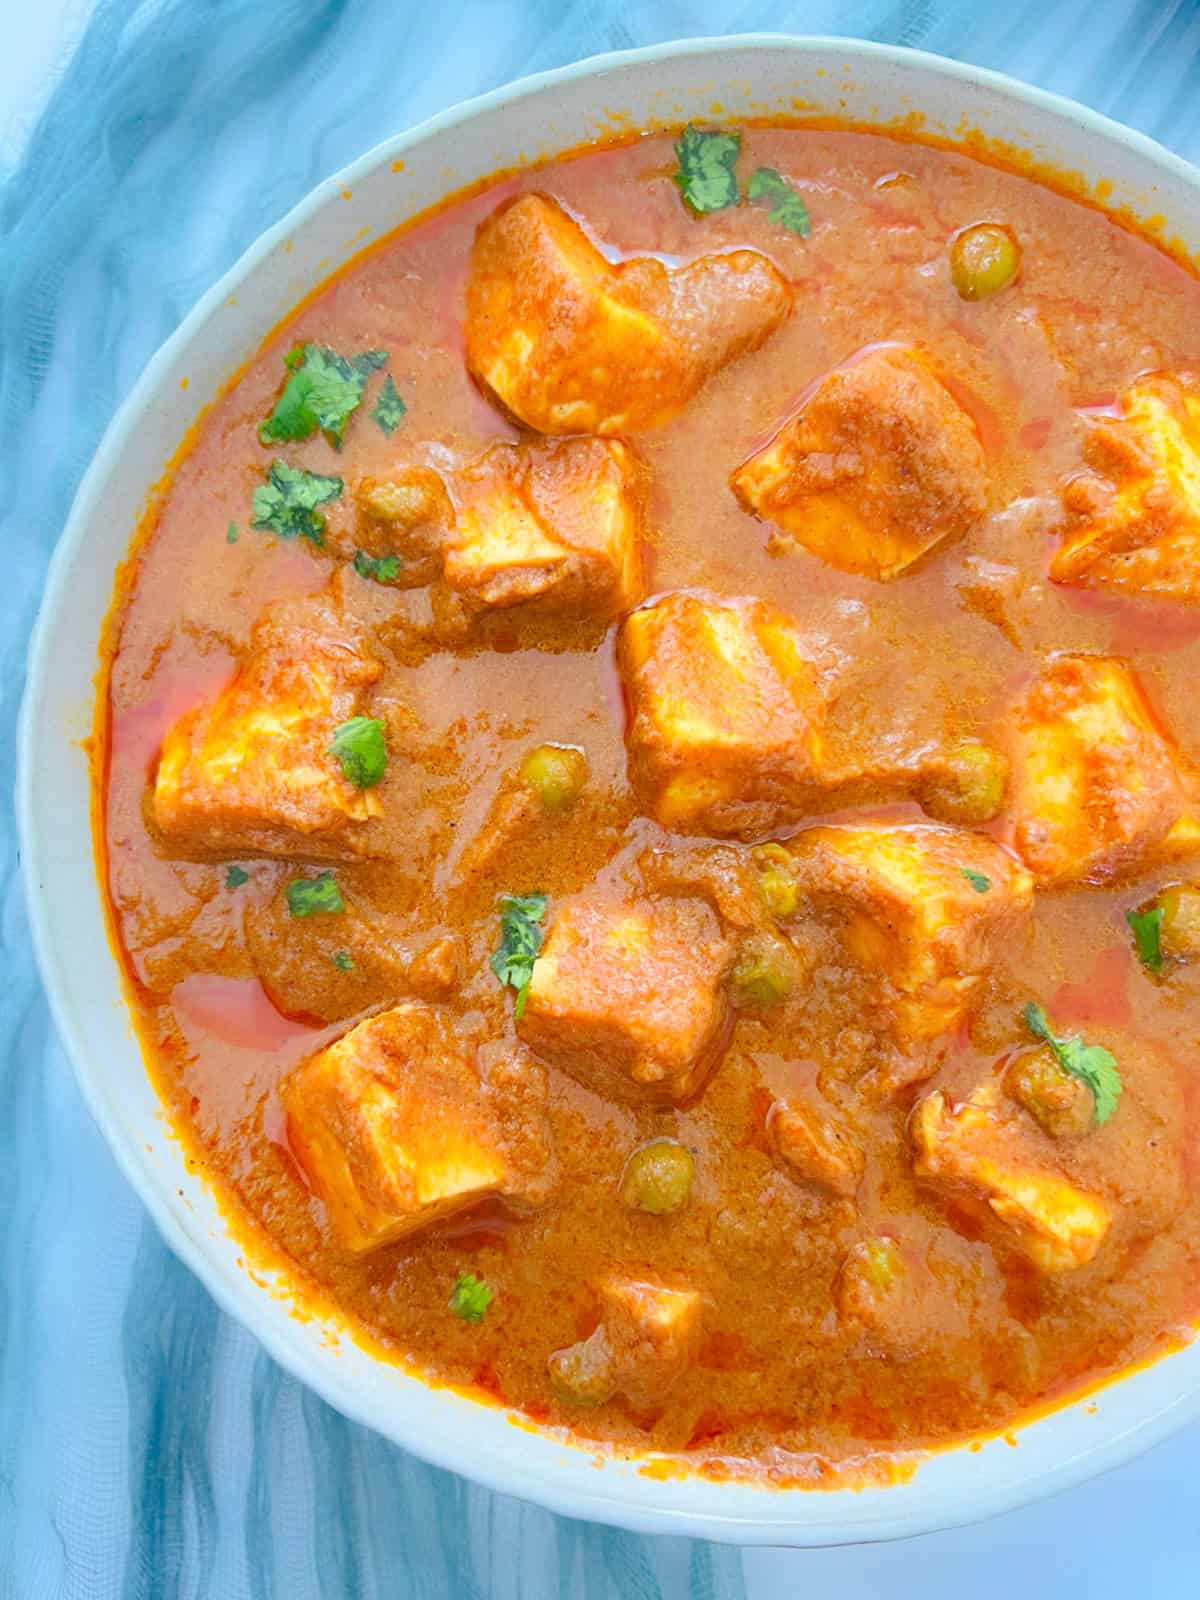 Matar paneer placed in a white bowl.